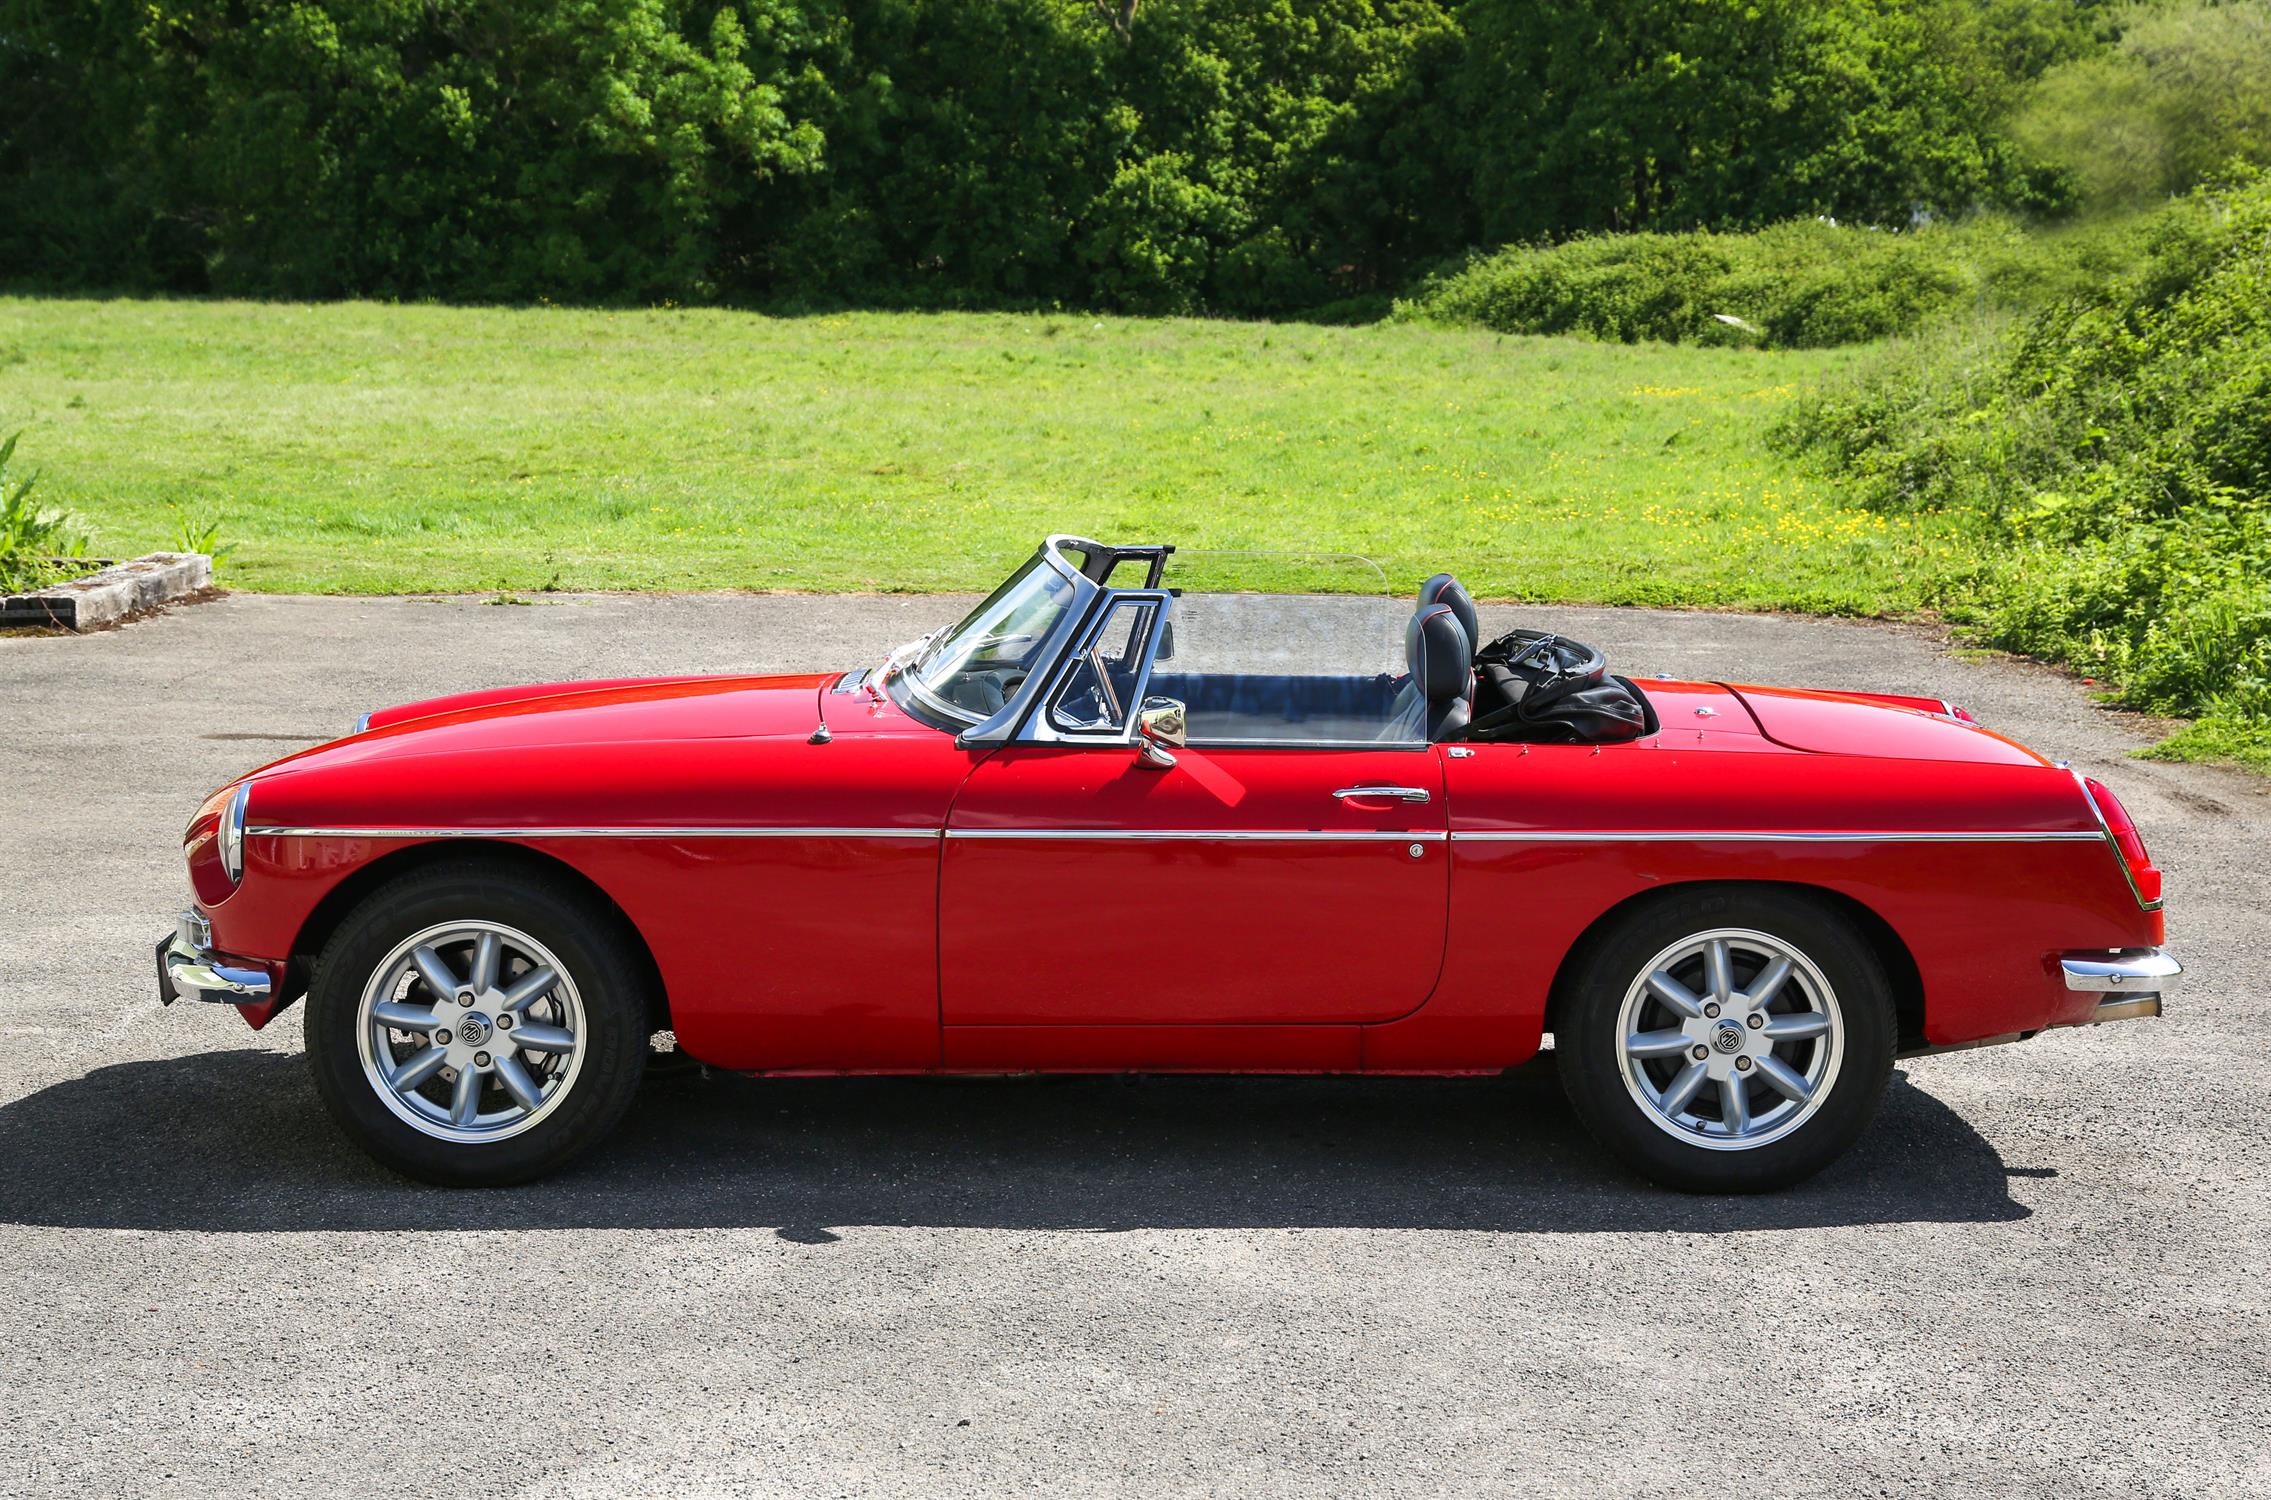 1968 MGB. Registration number LCD 365F - Fully rebuilt in 1997, with major refurbishment in 2019 - Image 3 of 6